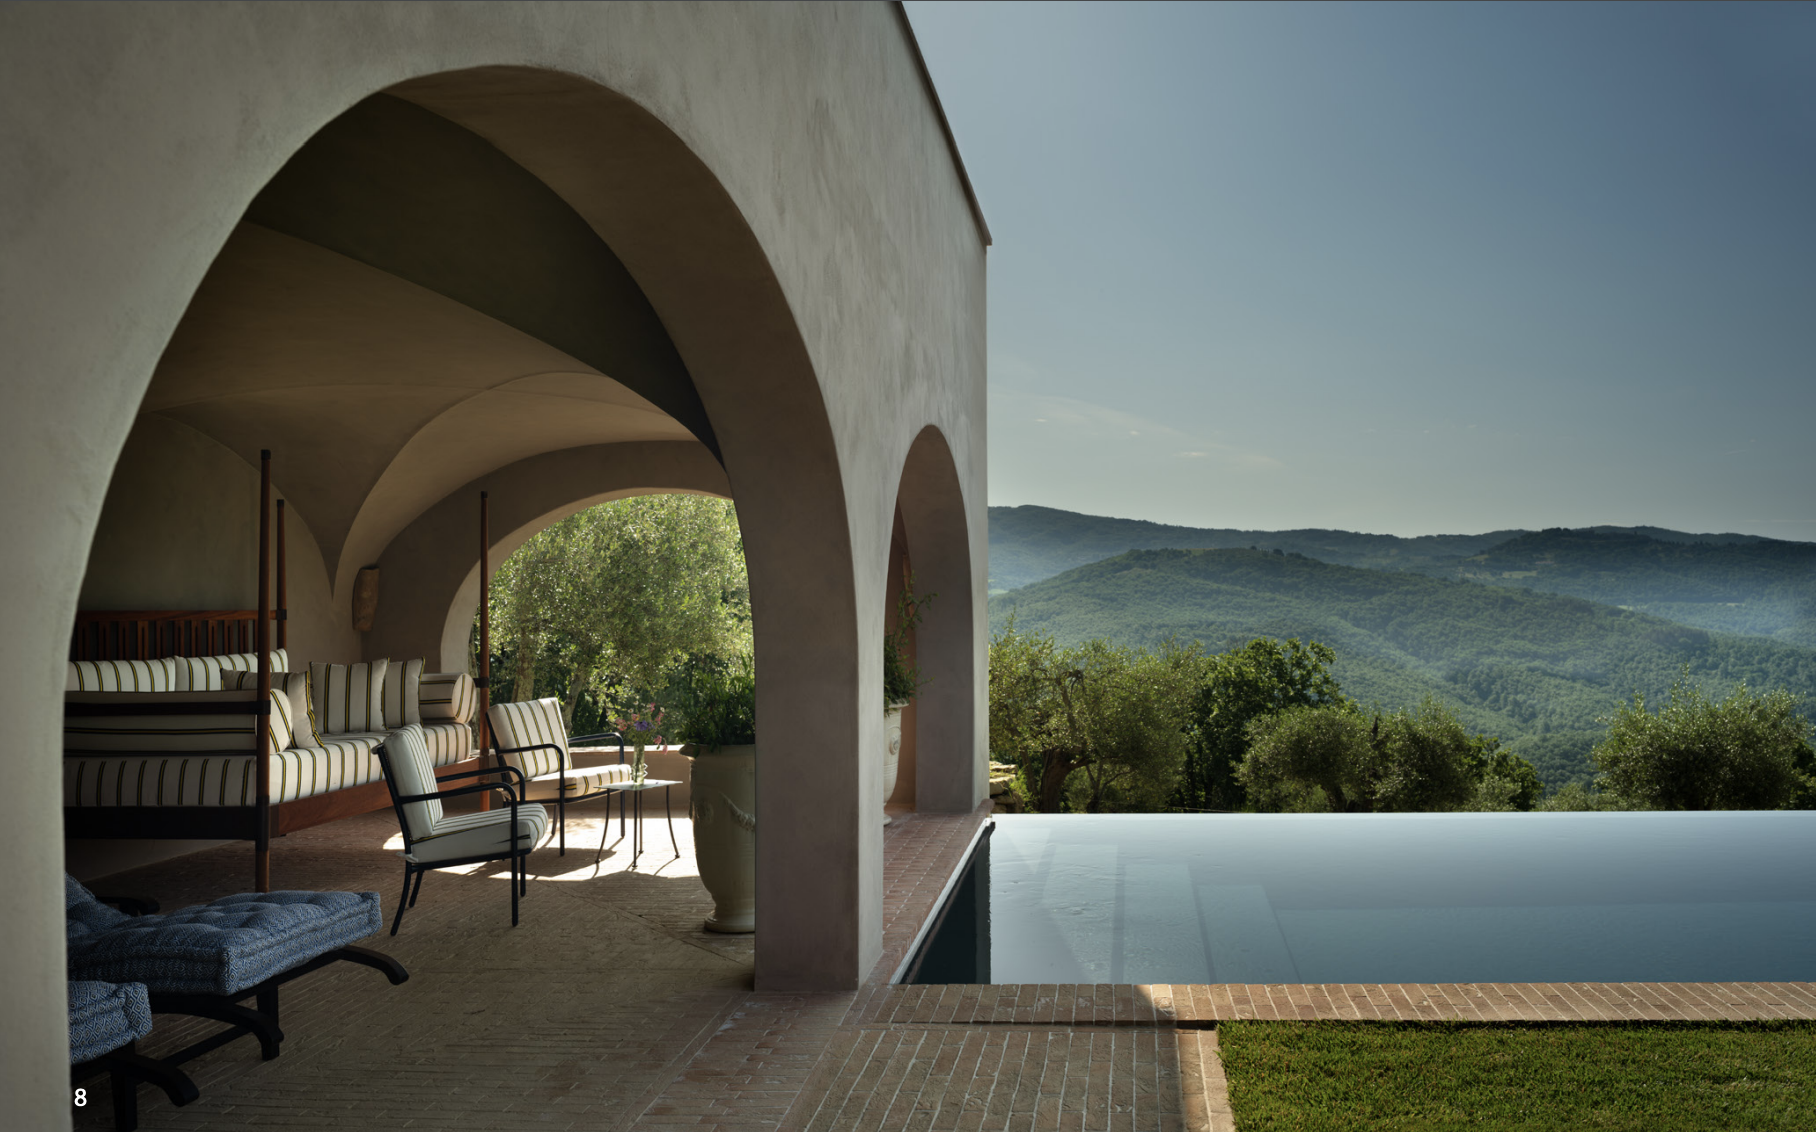 Francis+York+ Villa Tisciano: Boutique Farmhouse Rental in the Umbrian Hills 00009.png